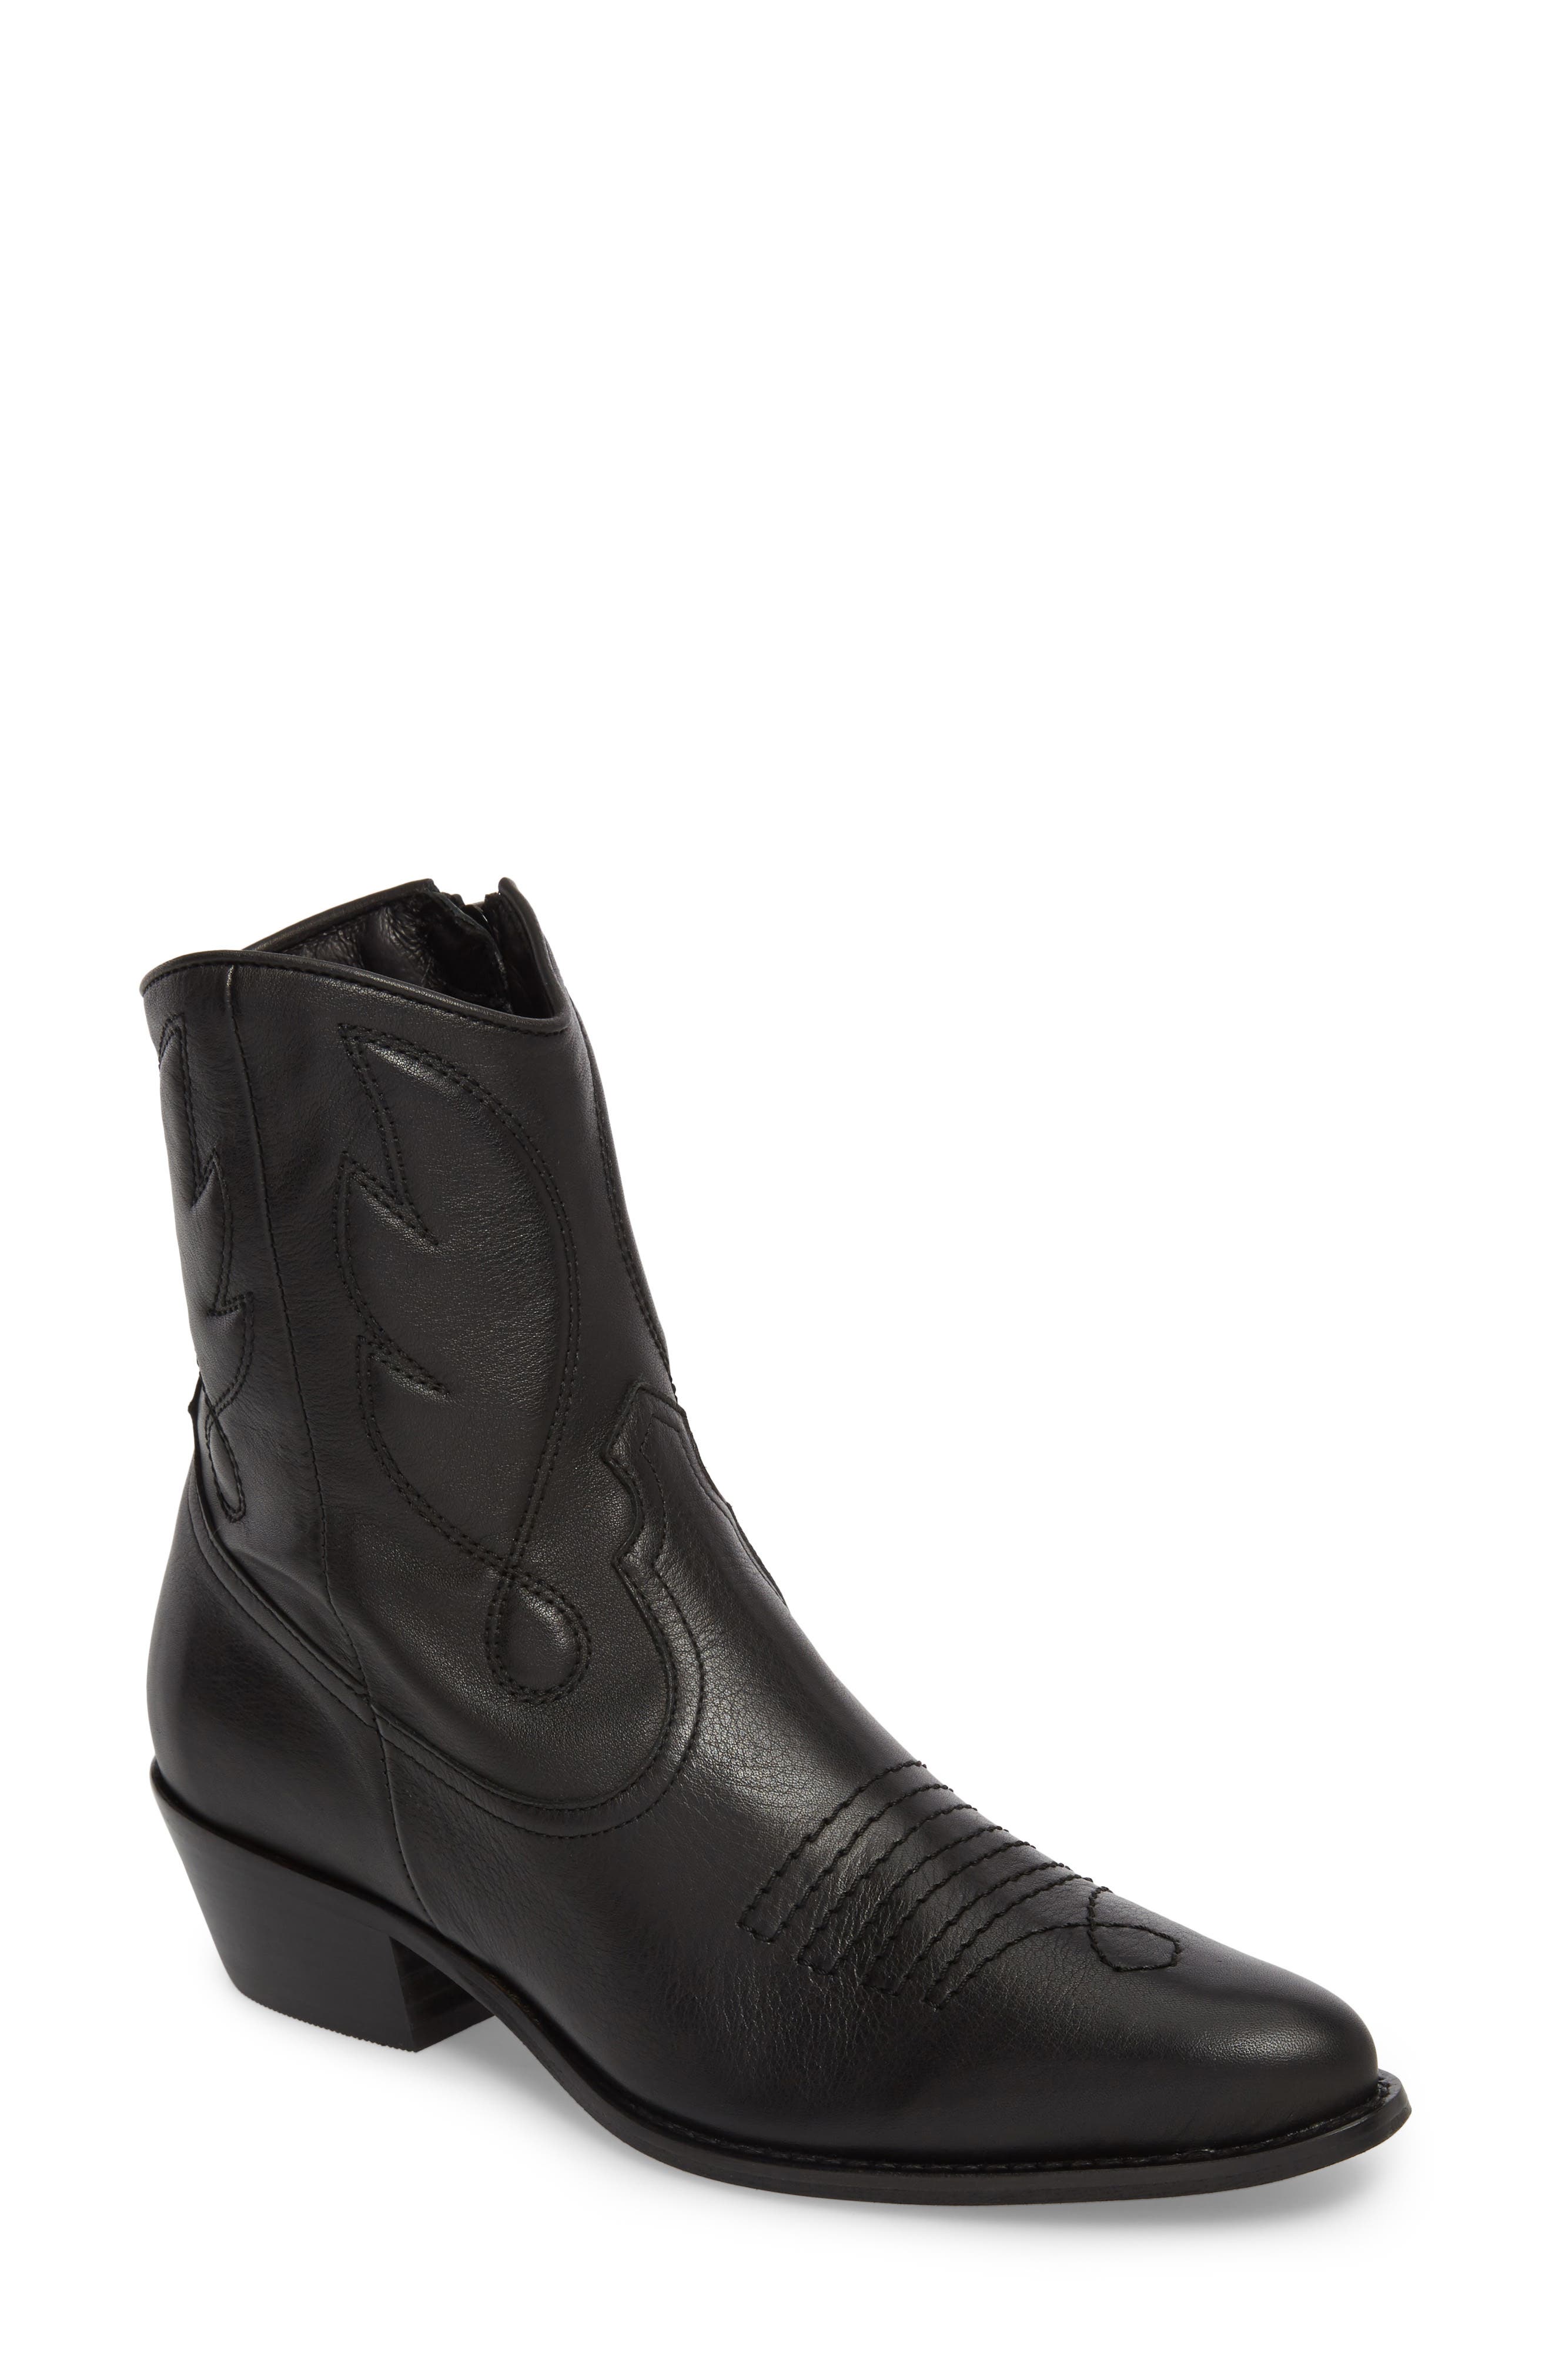 topshop western boots